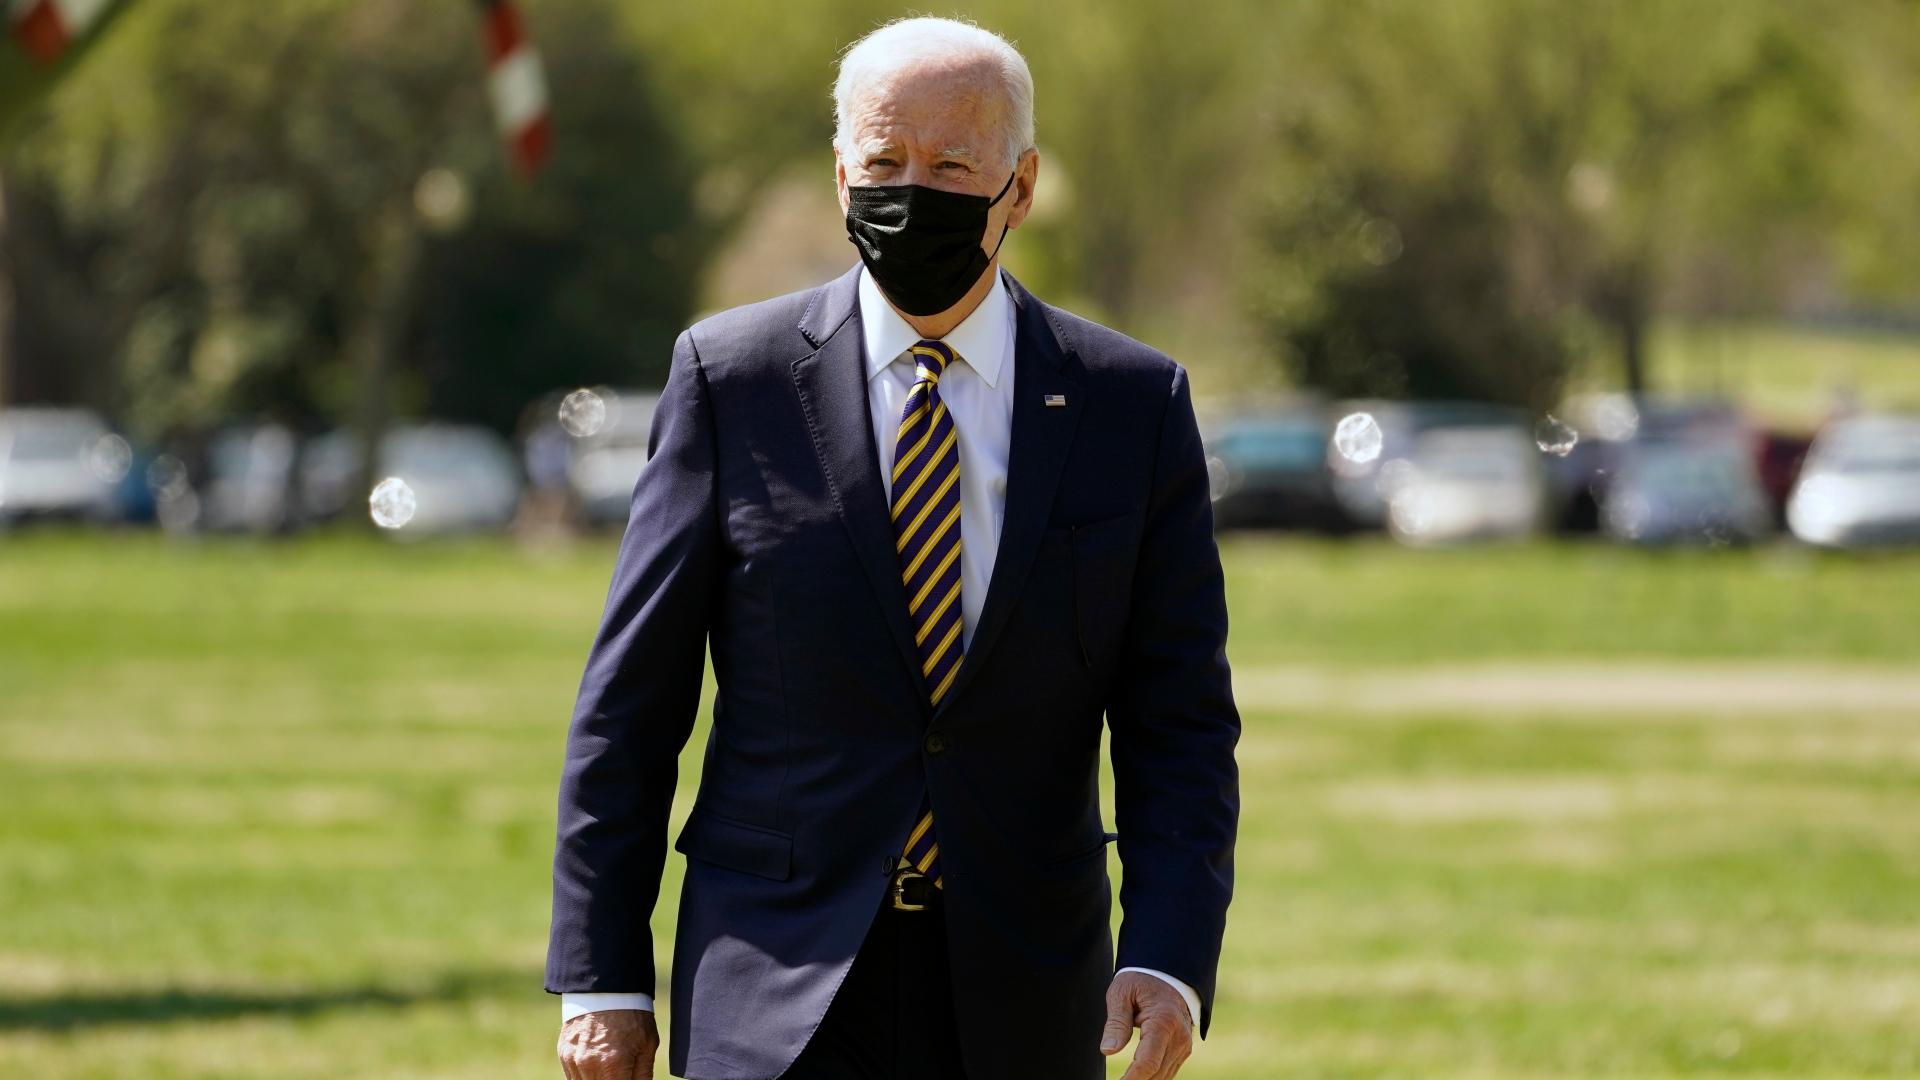 President Joe Biden walks over to speak to members of the media after arriving on the Ellipse on the National Mall after spending the weekend at Camp David, Monday, April 5, 2021, in Washington. (AP Photo / Evan Vucci)